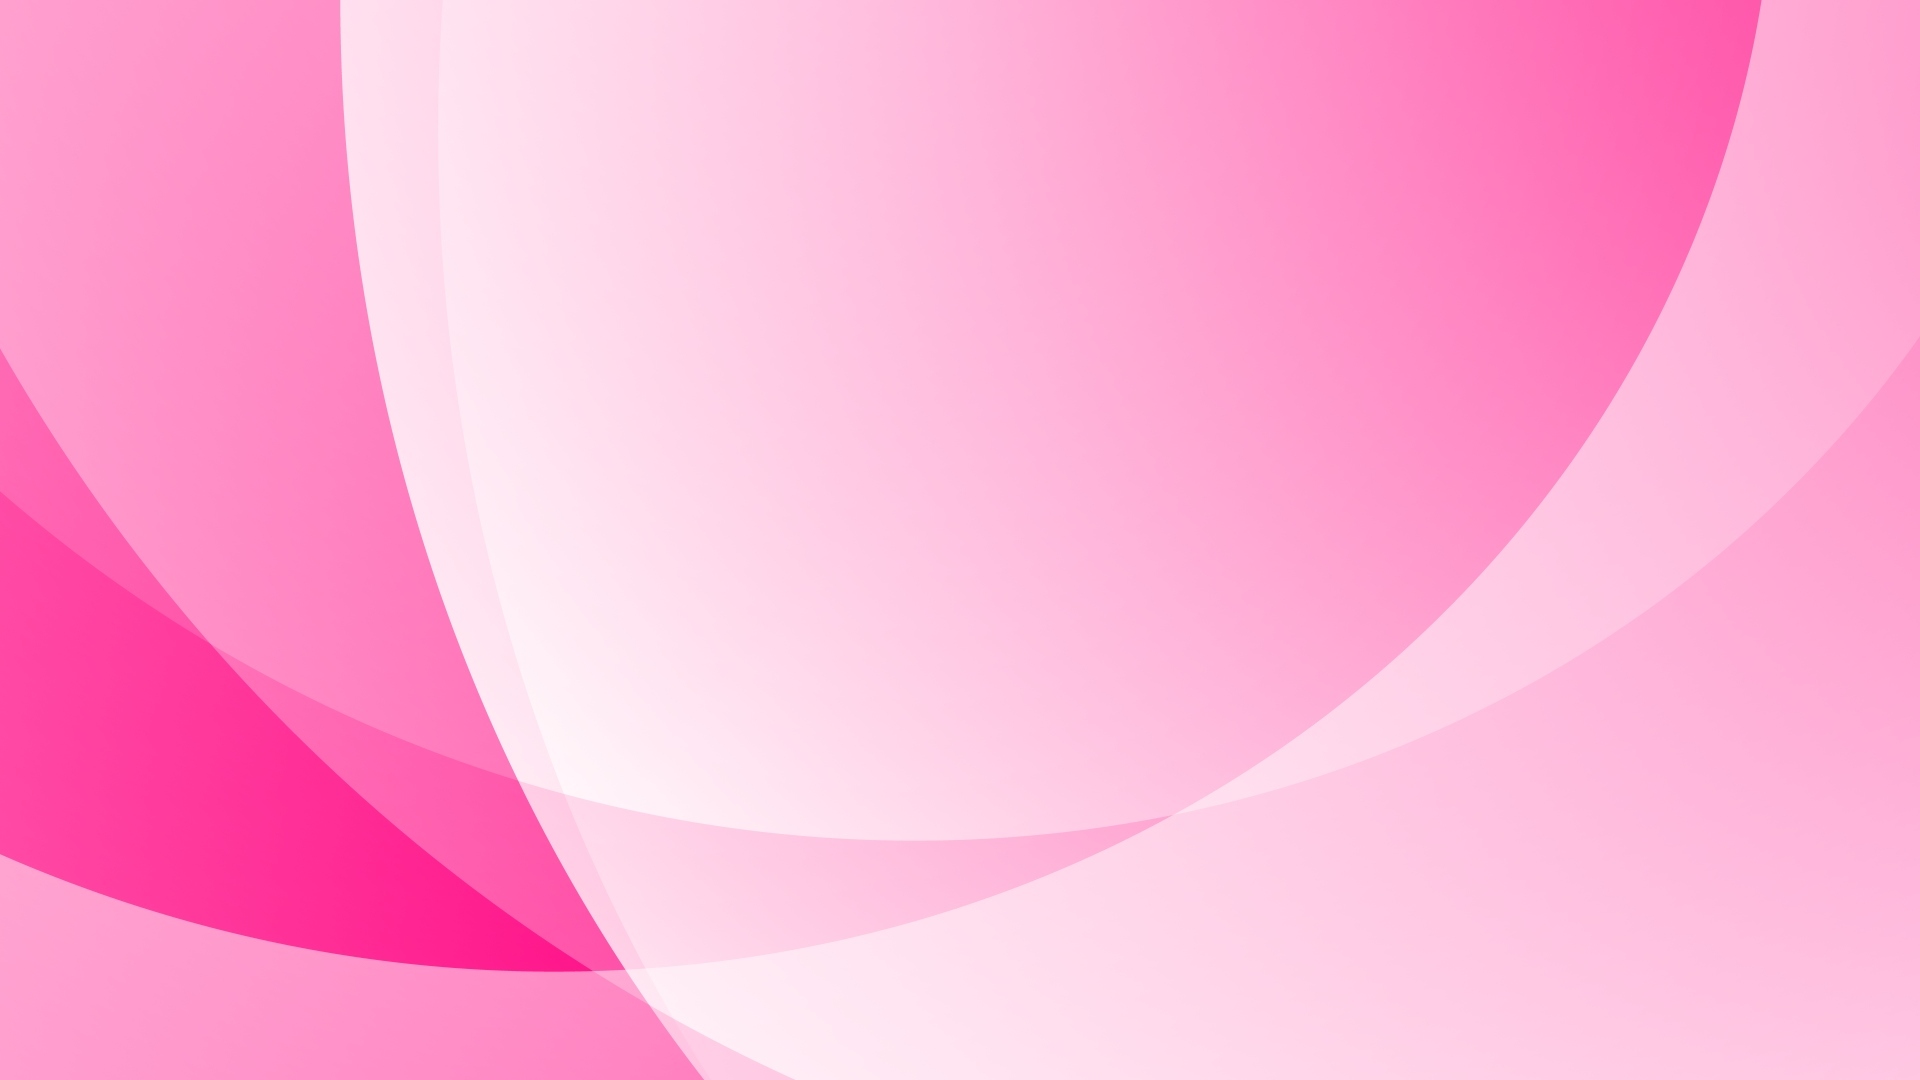 Light Pink Abstract Background - 1920x1080 Wallpaper 